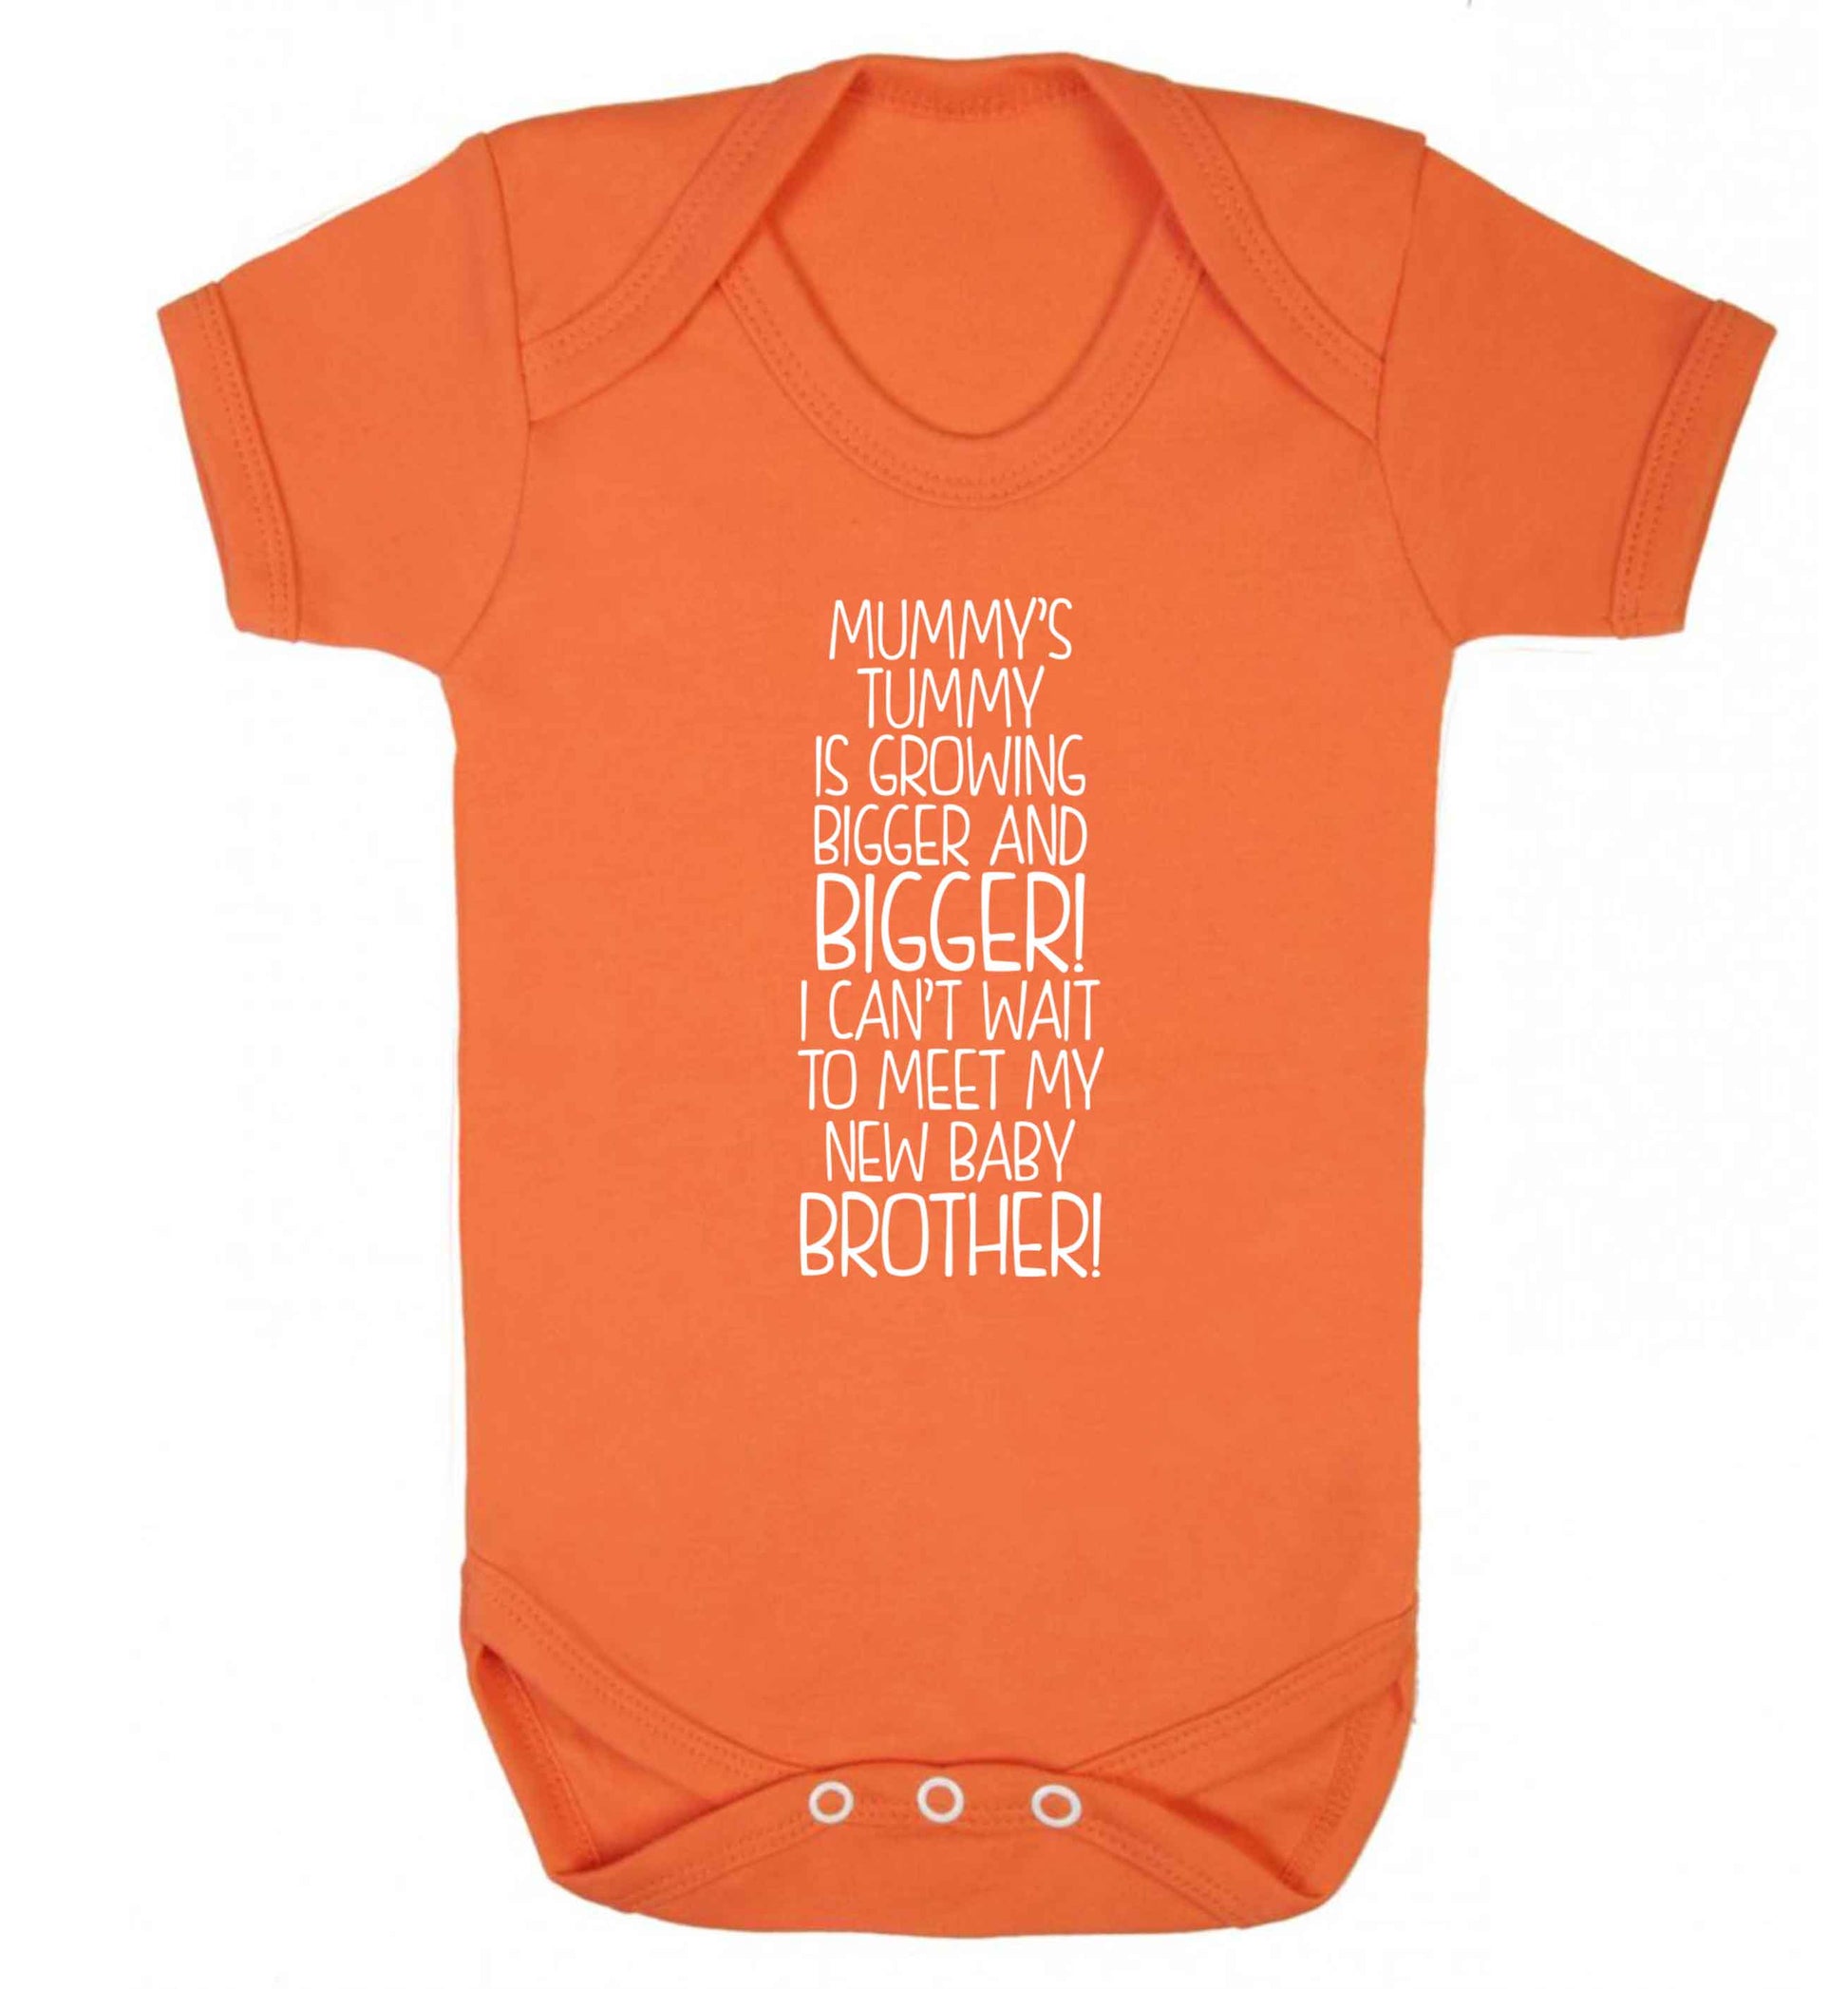 Mummy's tummy is growing bigger and bigger I can't wait to meet my new baby brother! Baby Vest orange 18-24 months